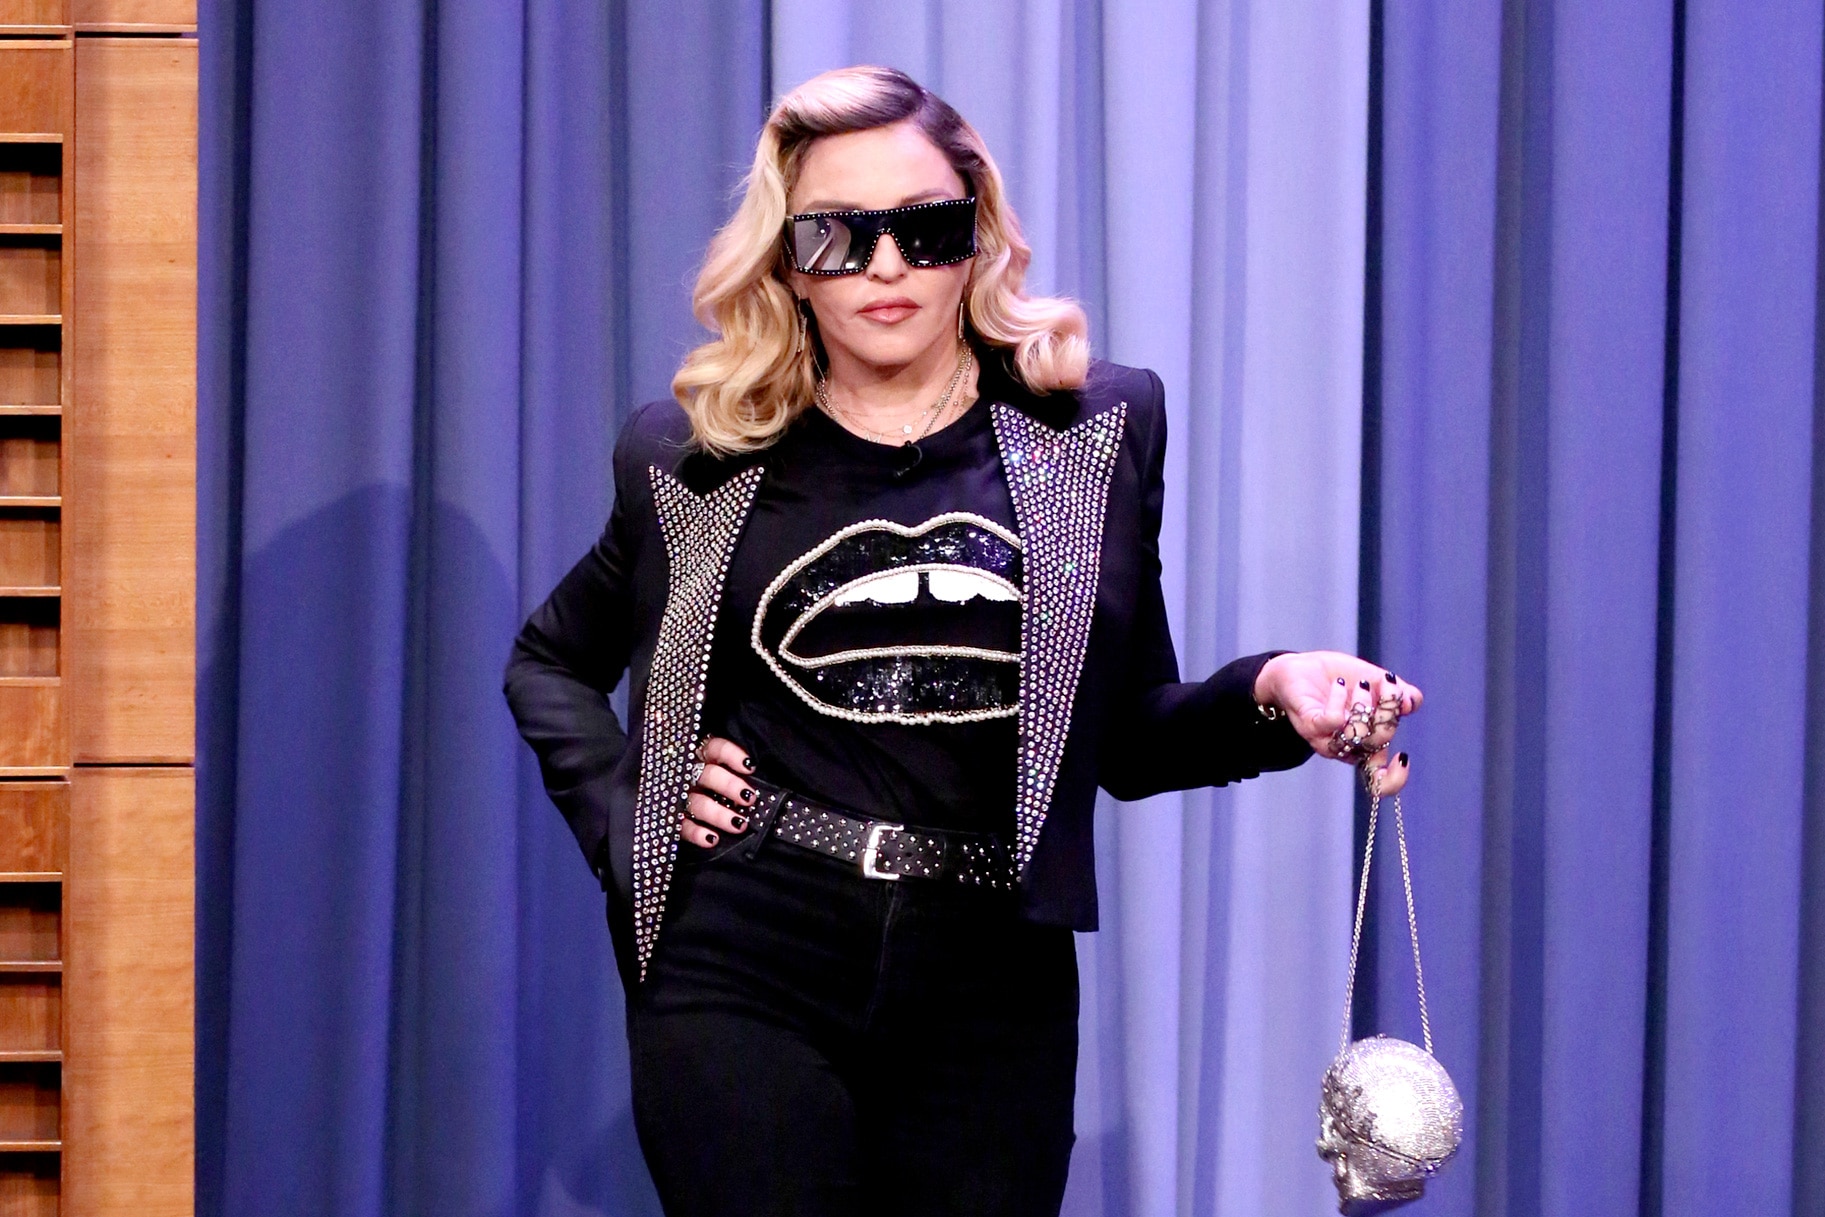 Madonna sits on Louis Vuitton luggage on budget flight